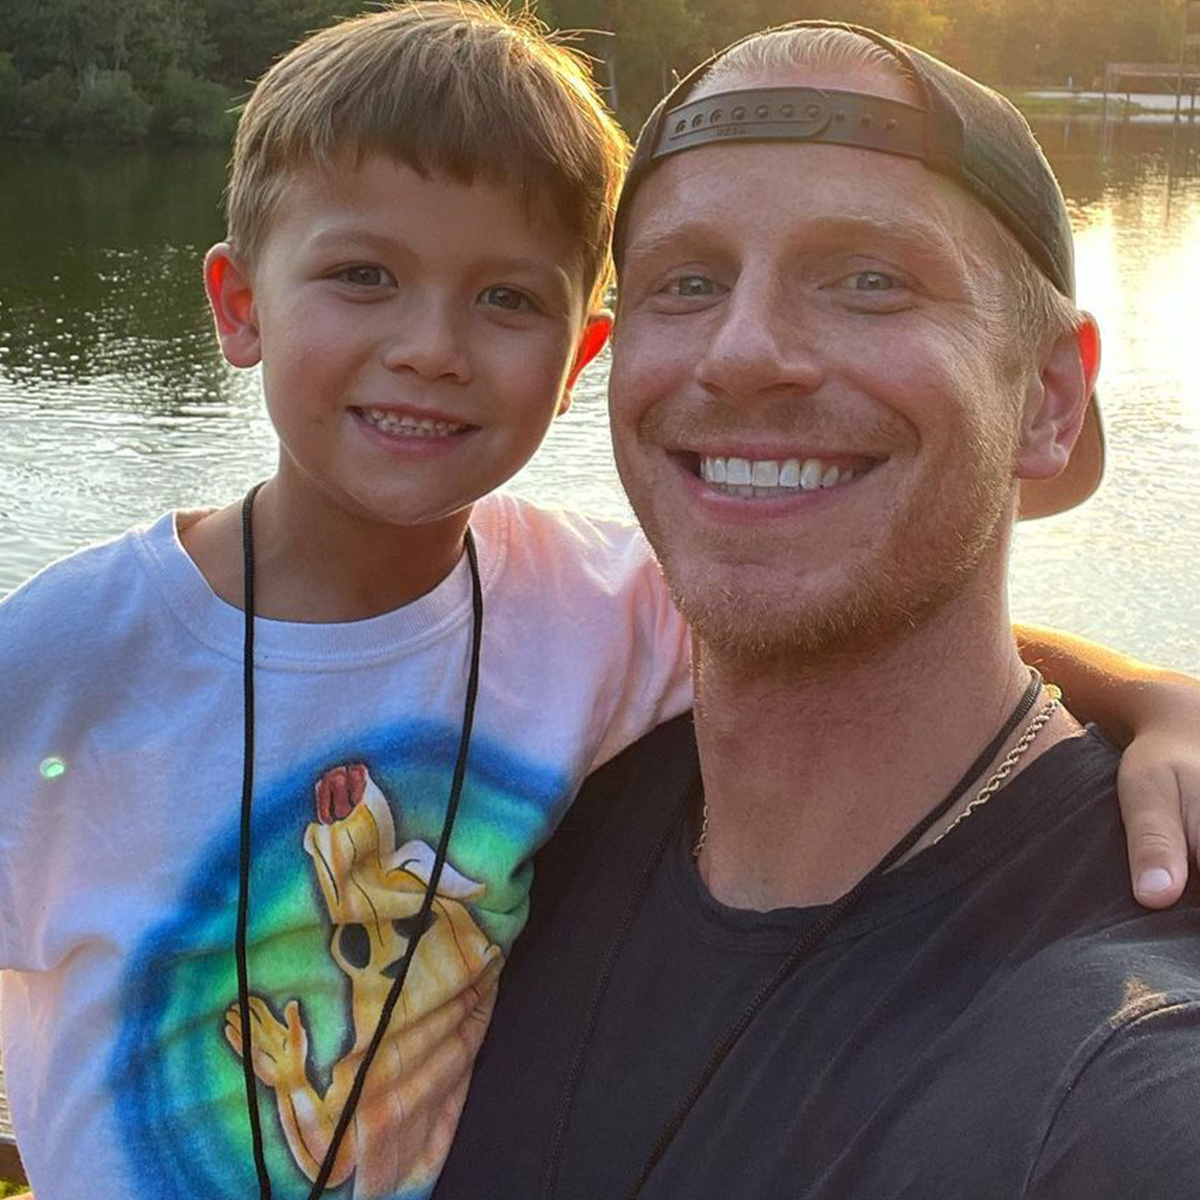 Sean Lowe Recalls Keeping Son Safe During Attempted Armed Robbery